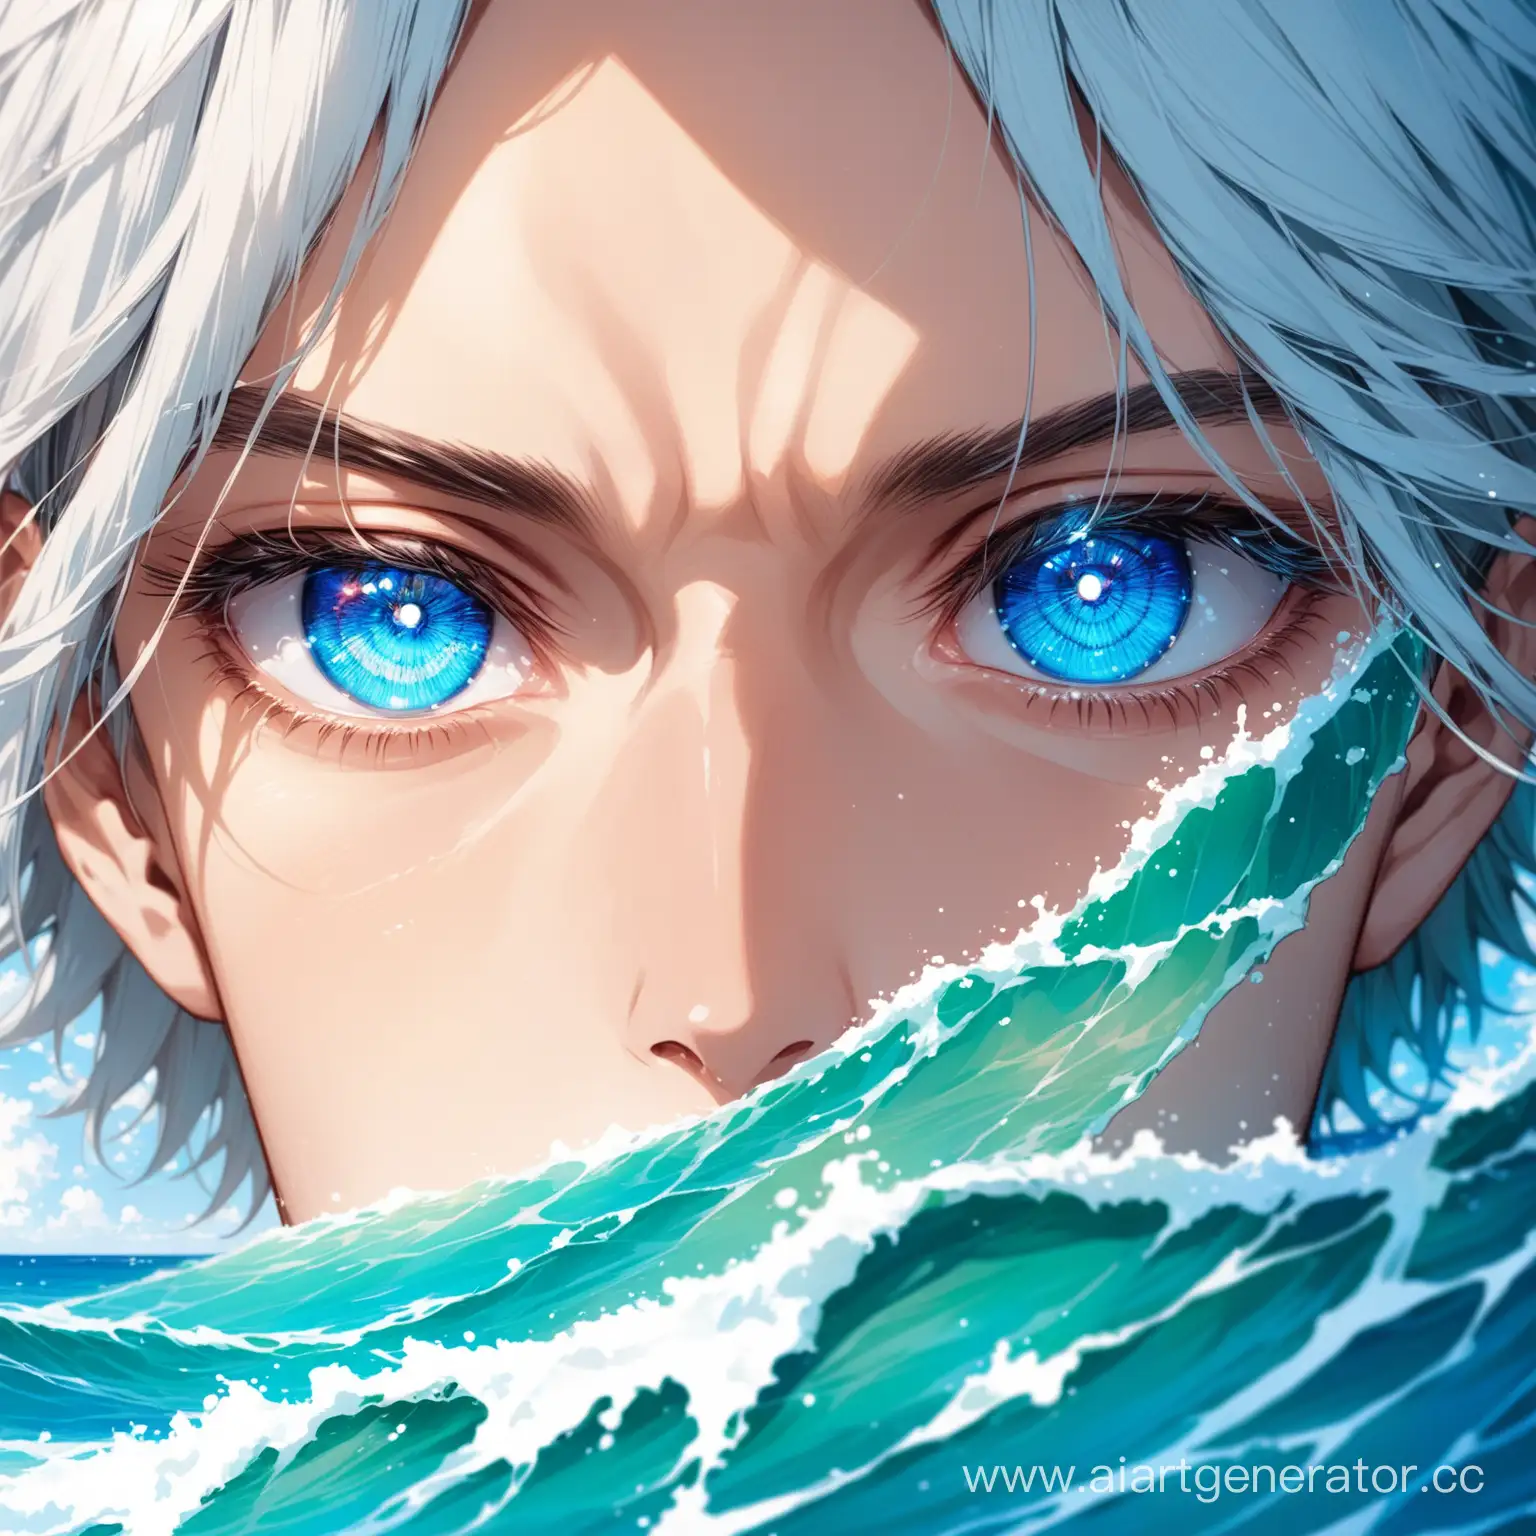 men's eyes are blue and there is an ocean in the pupils